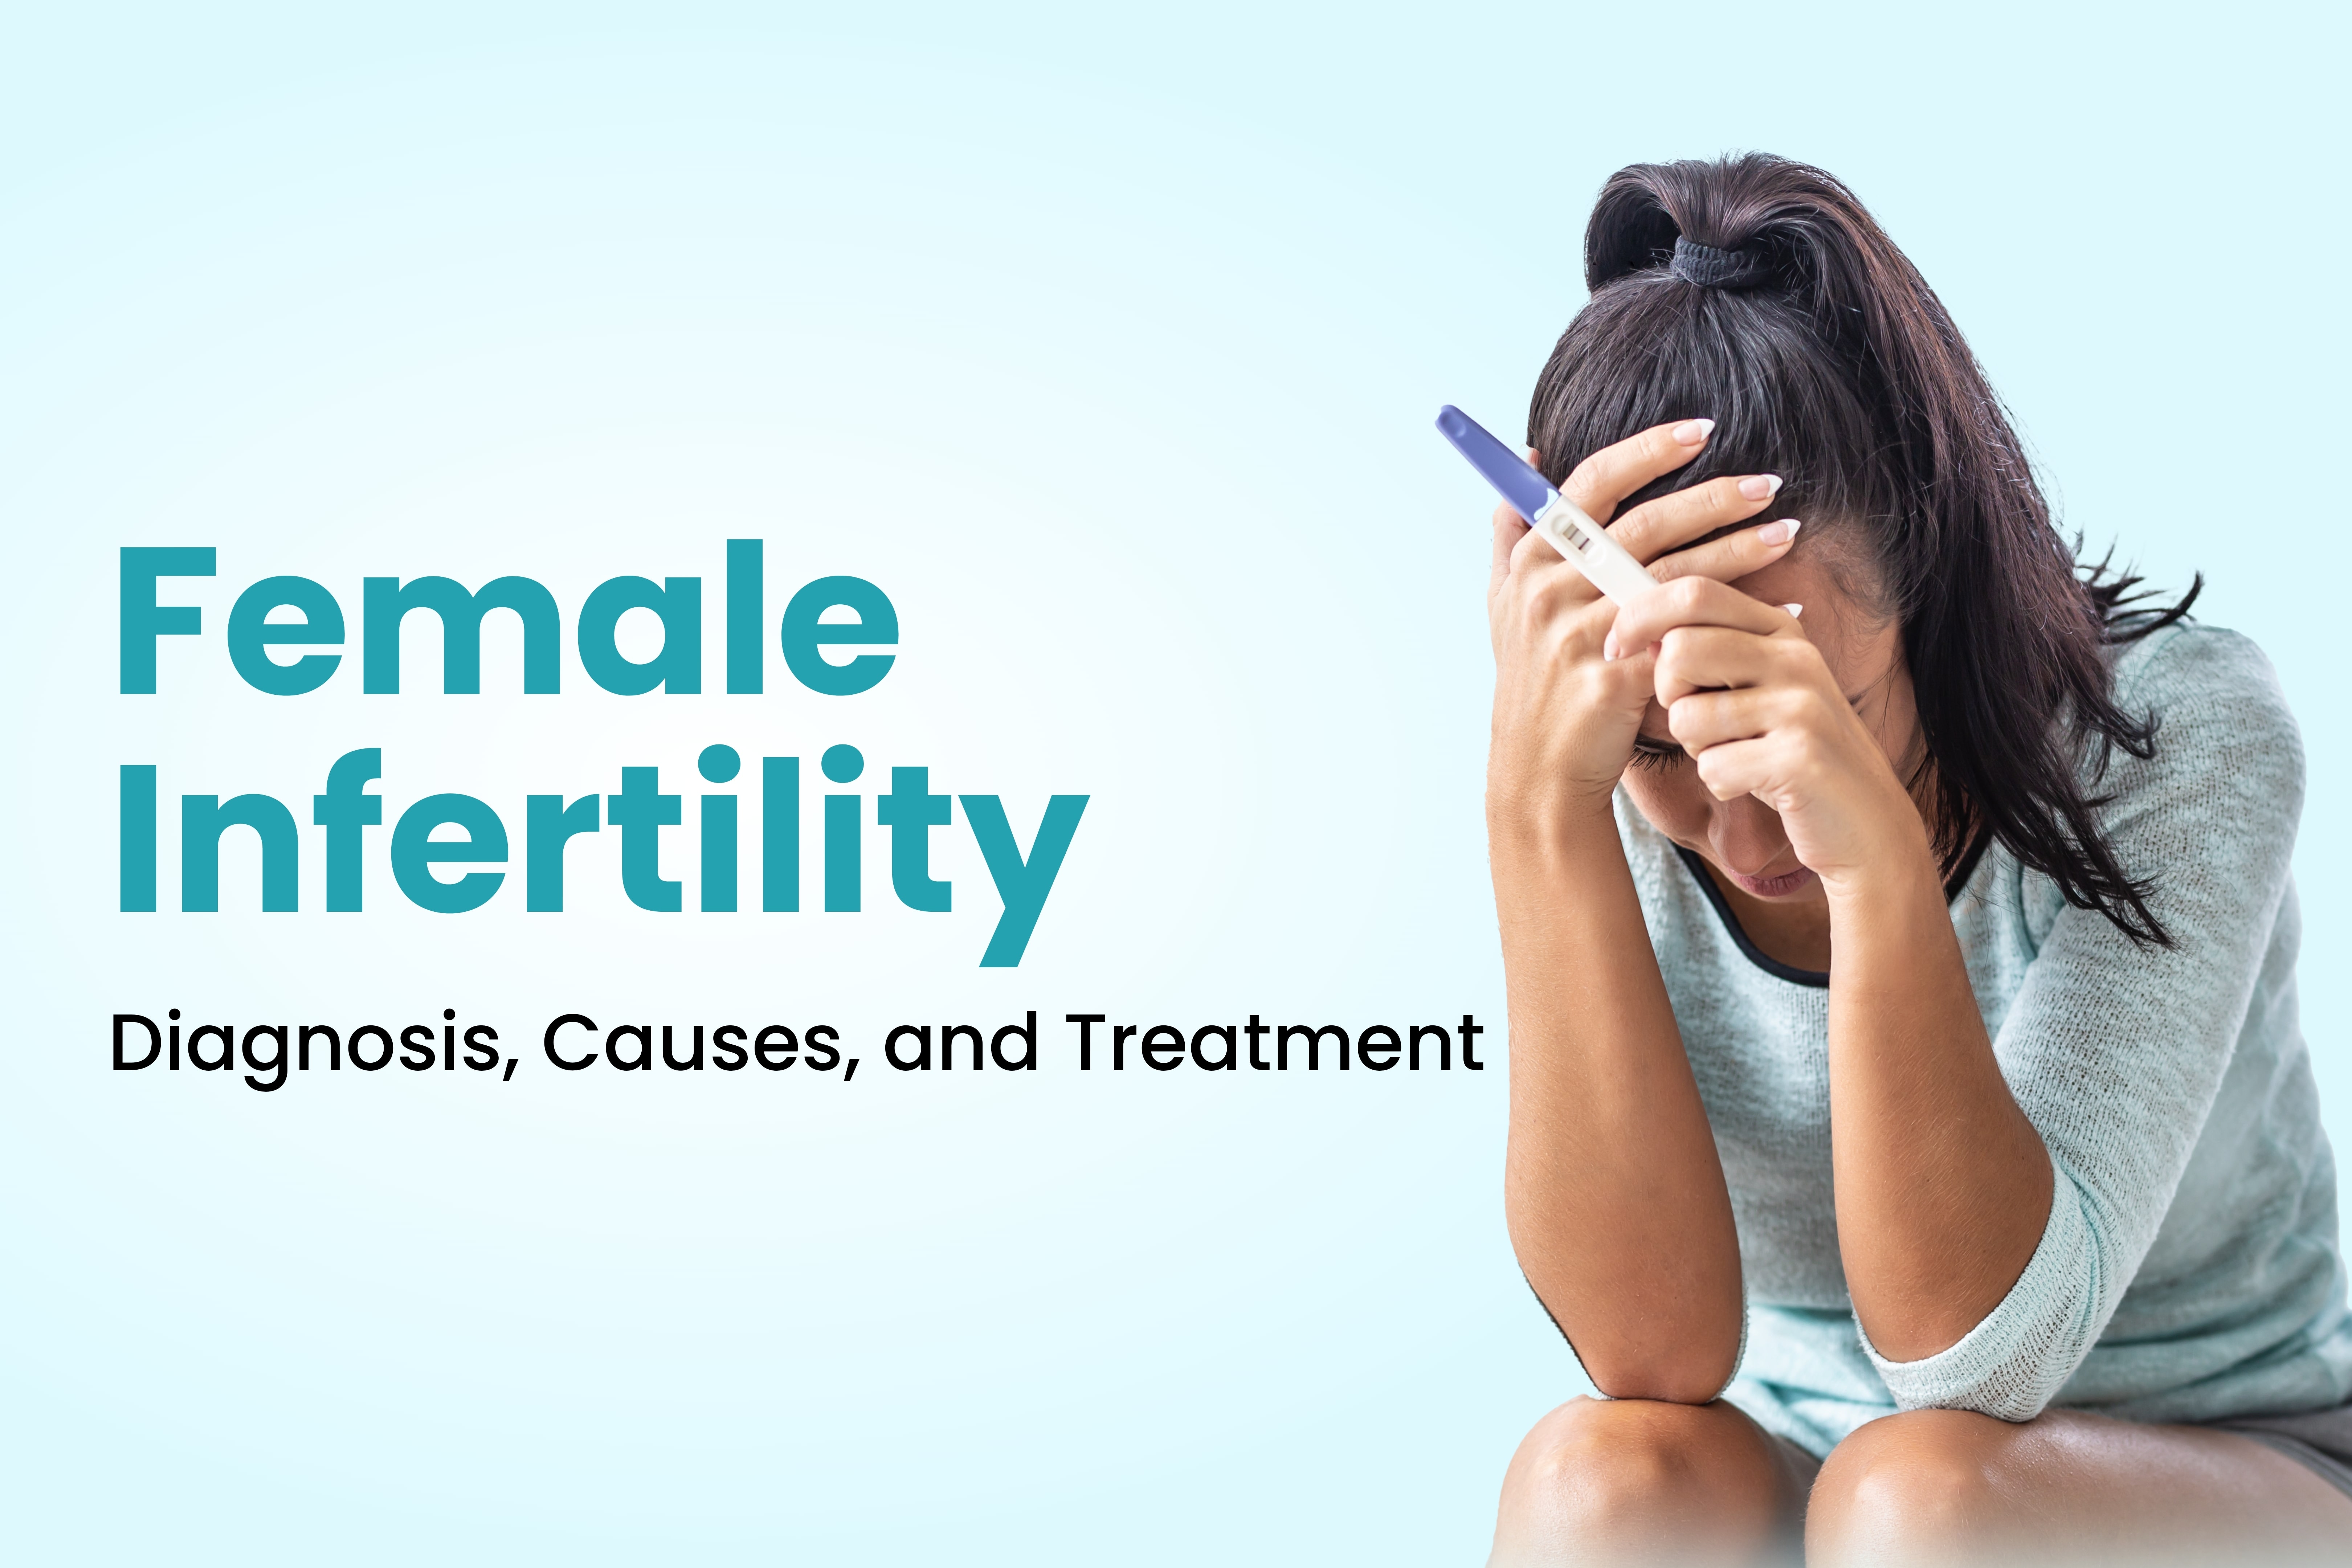 Female Infertility - Diagnosis, Causes, and Treatment